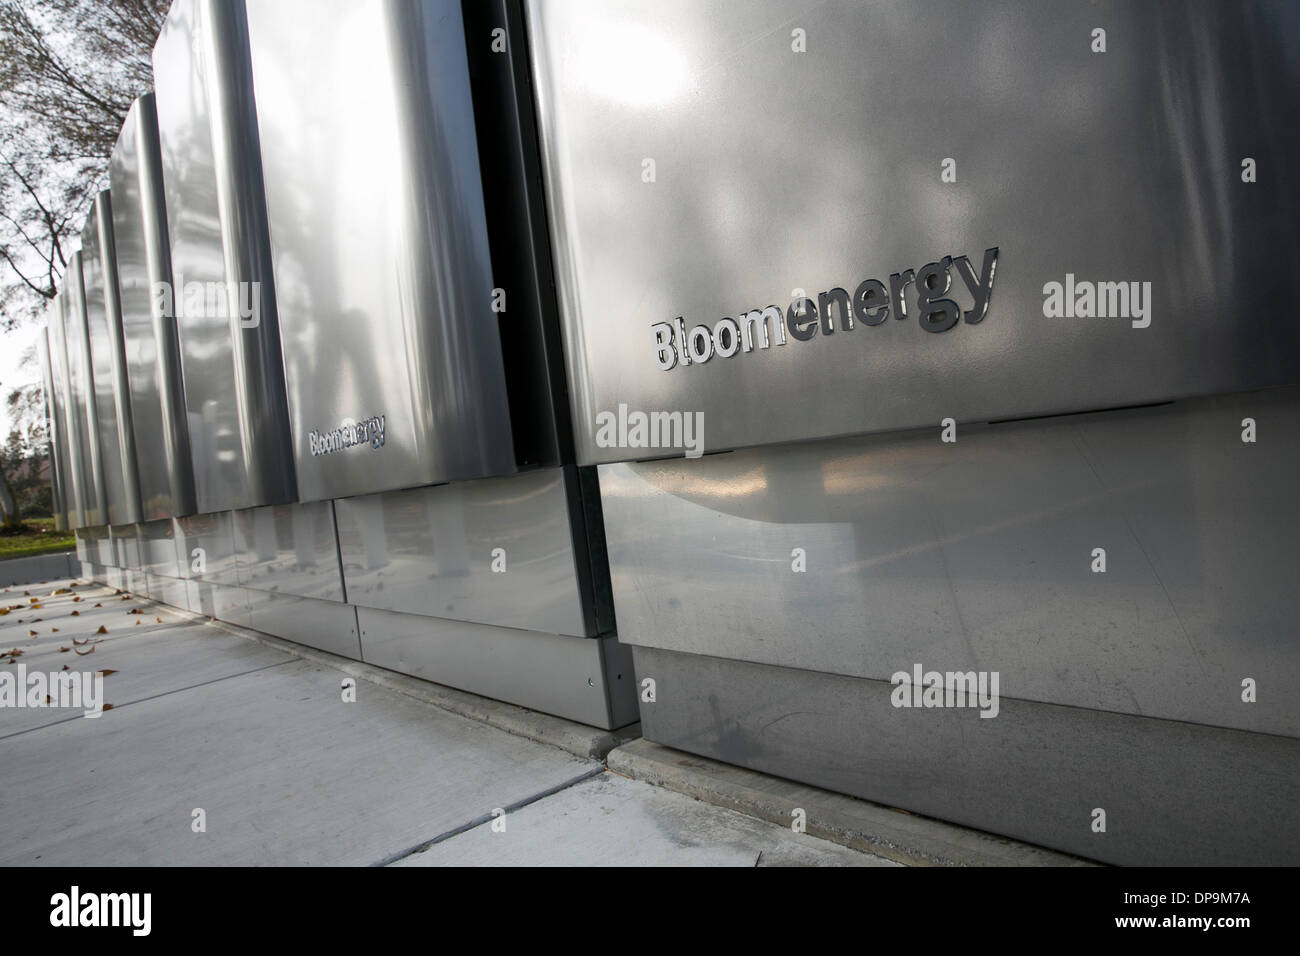 Bloom Energy Servers at the headquarters of Bloom Energy in Sunnyvale, California.  Stock Photo